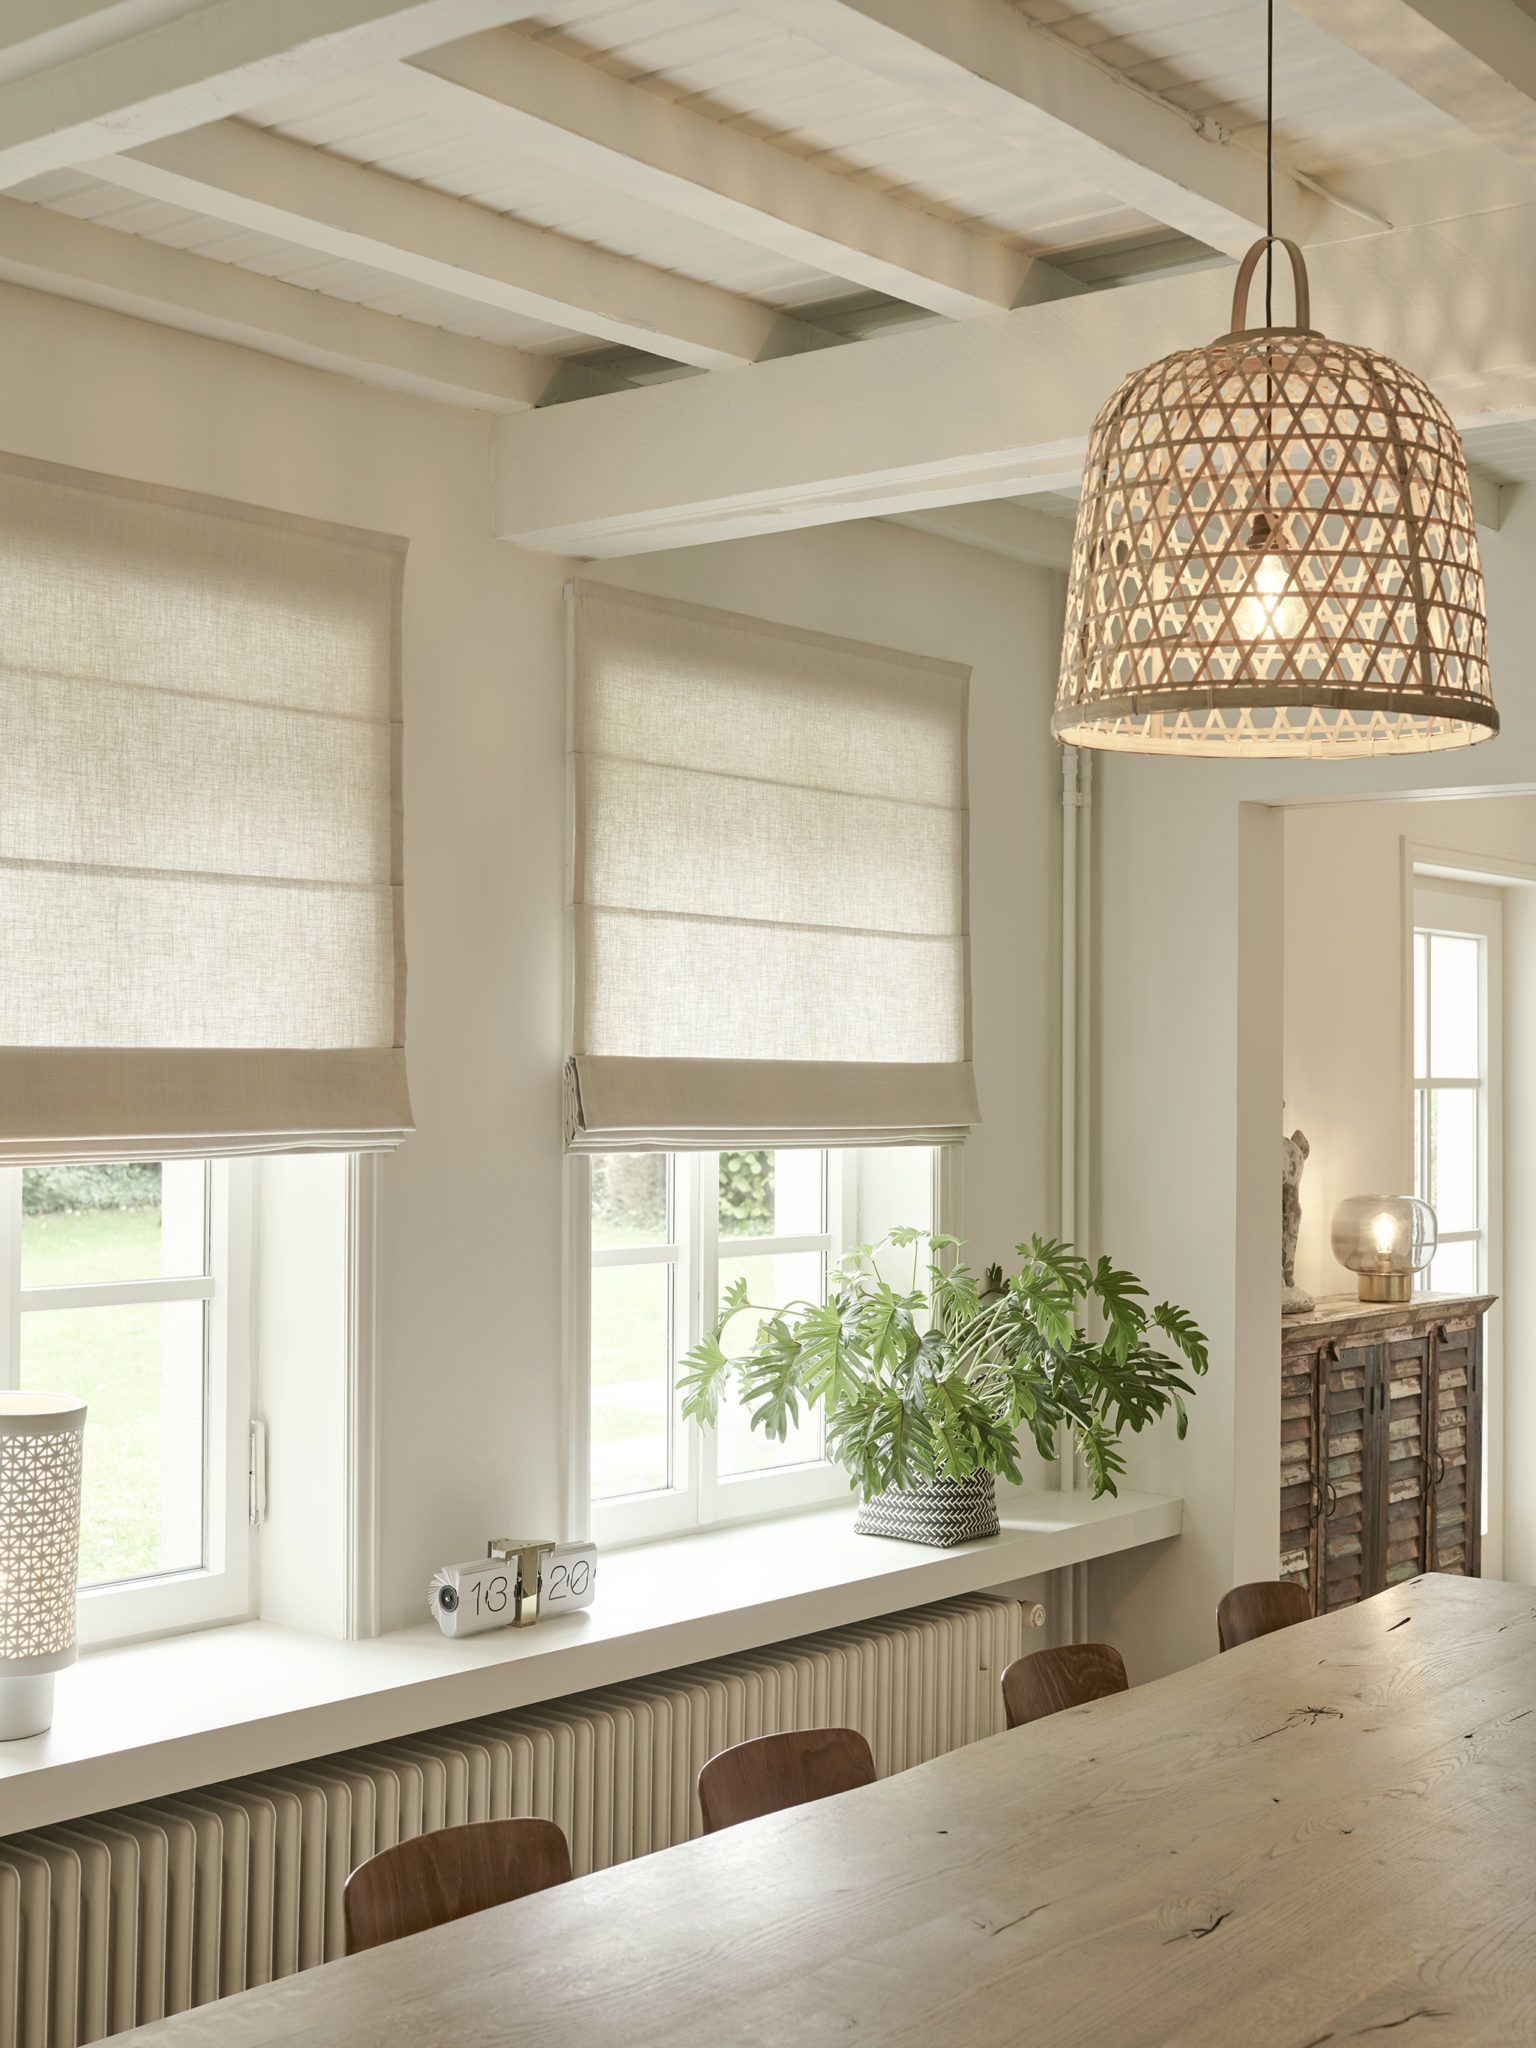 Roman shades for your window